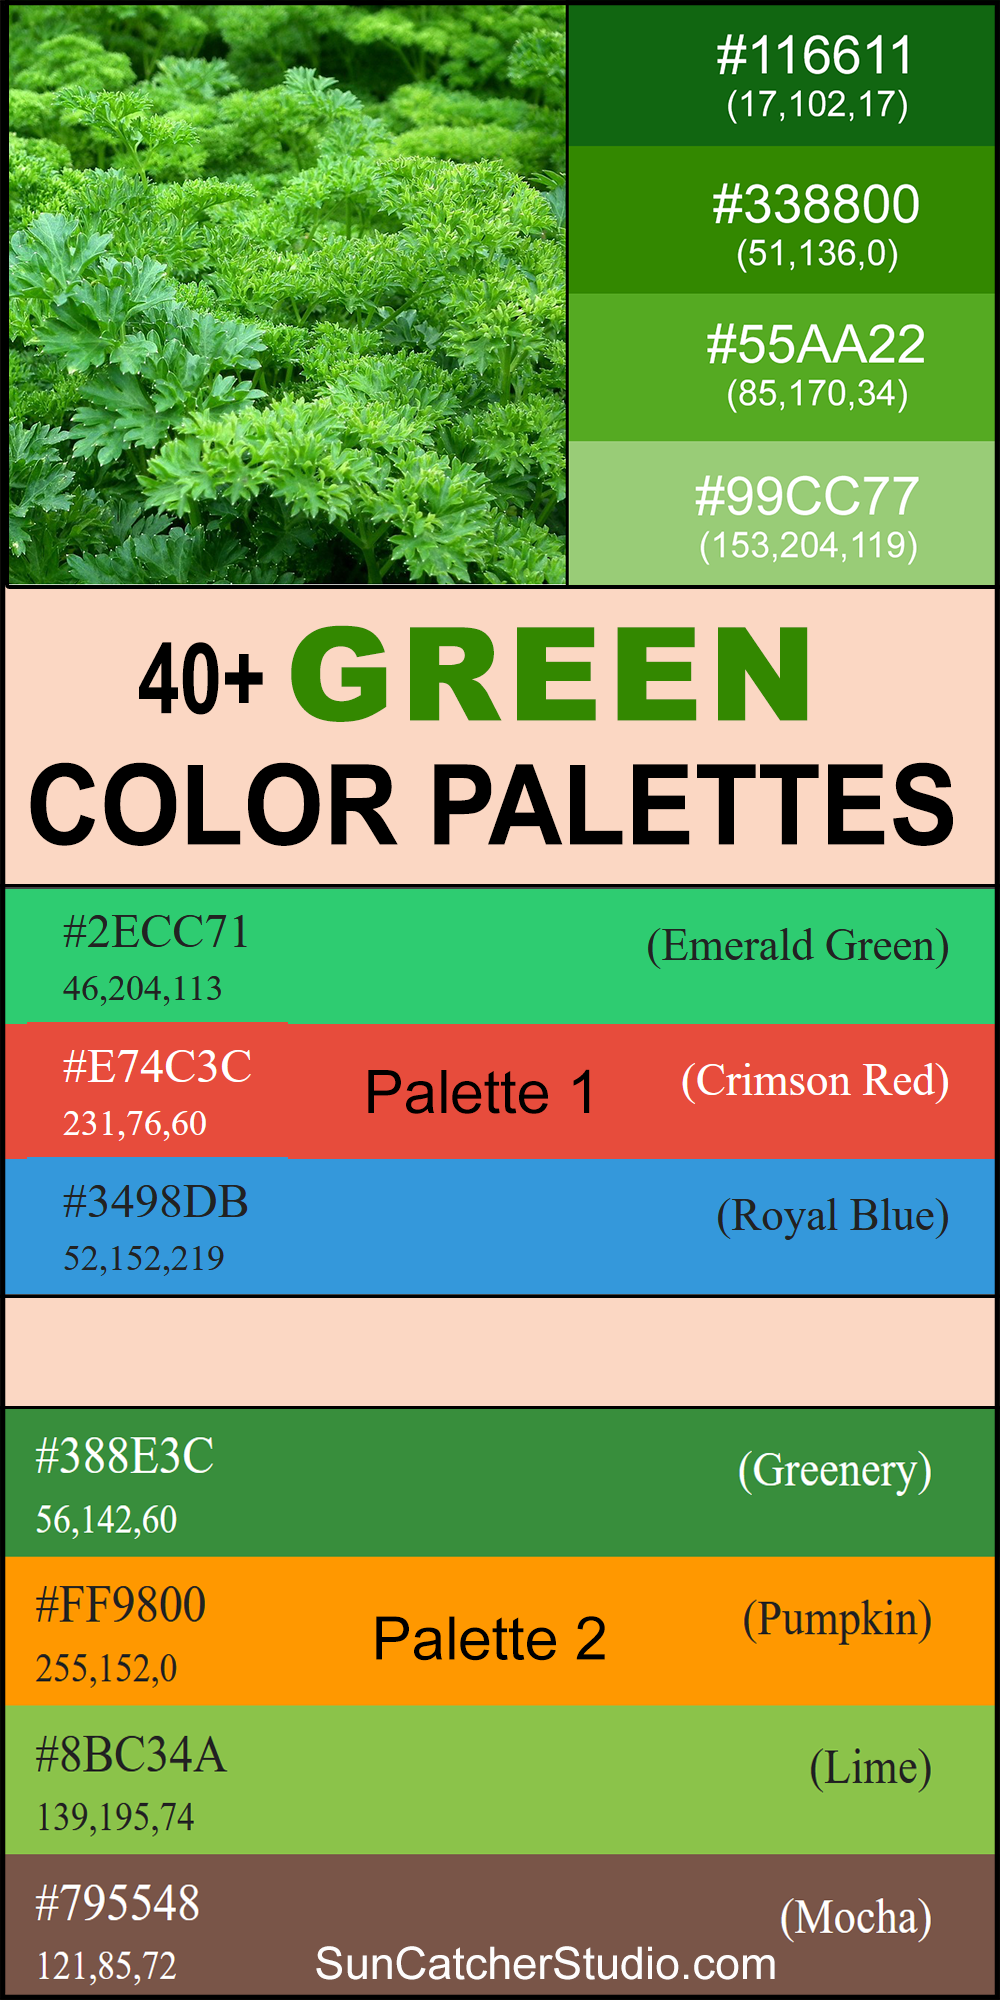 Green color palettes, green color combinations, color palettes, color schemes, eye-catching, DIY, trendy, best, popular, complementary, stylish, modern, creative, inspire, design.